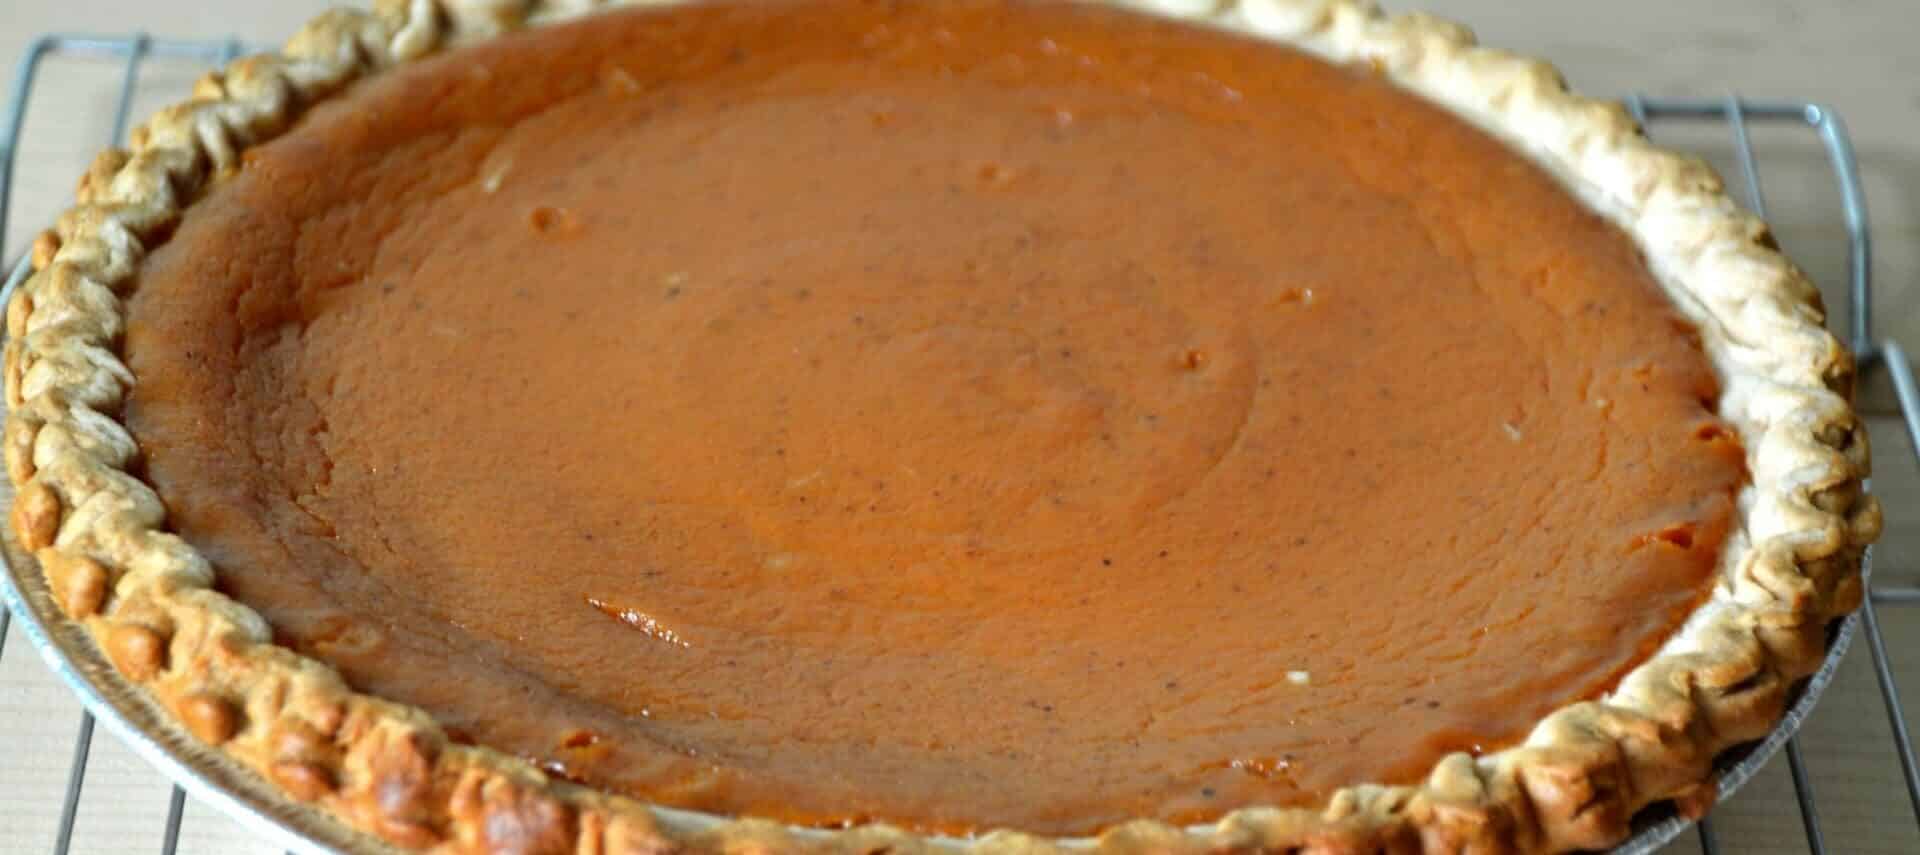 Pumpkin pie with browned crust sitting on silver cooling rack.